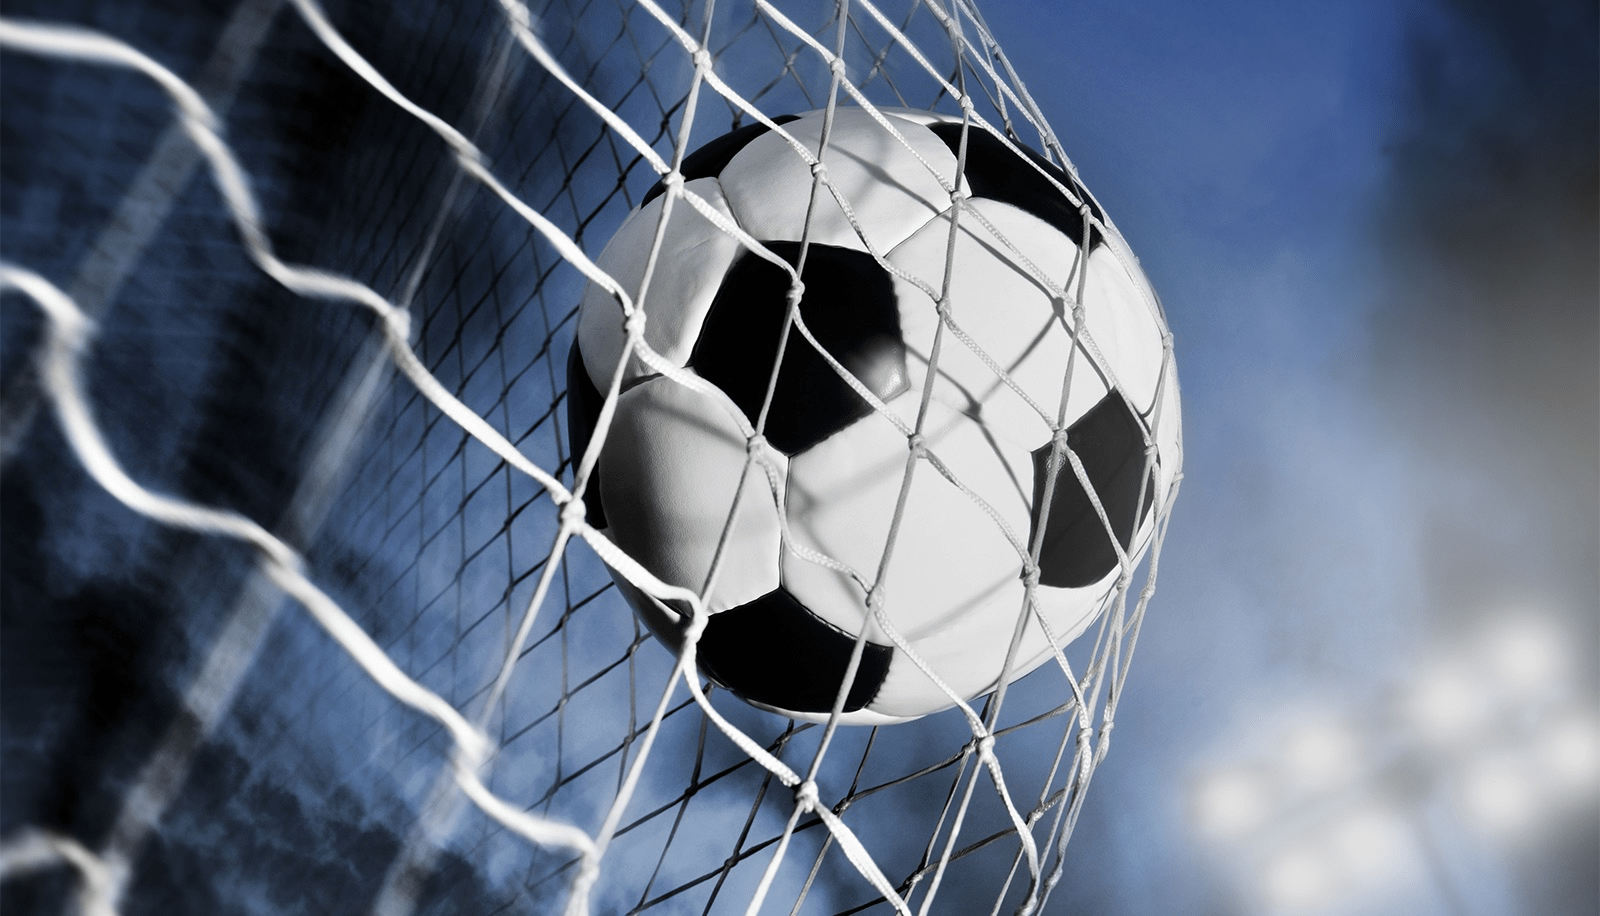 websites for streaming live football matches